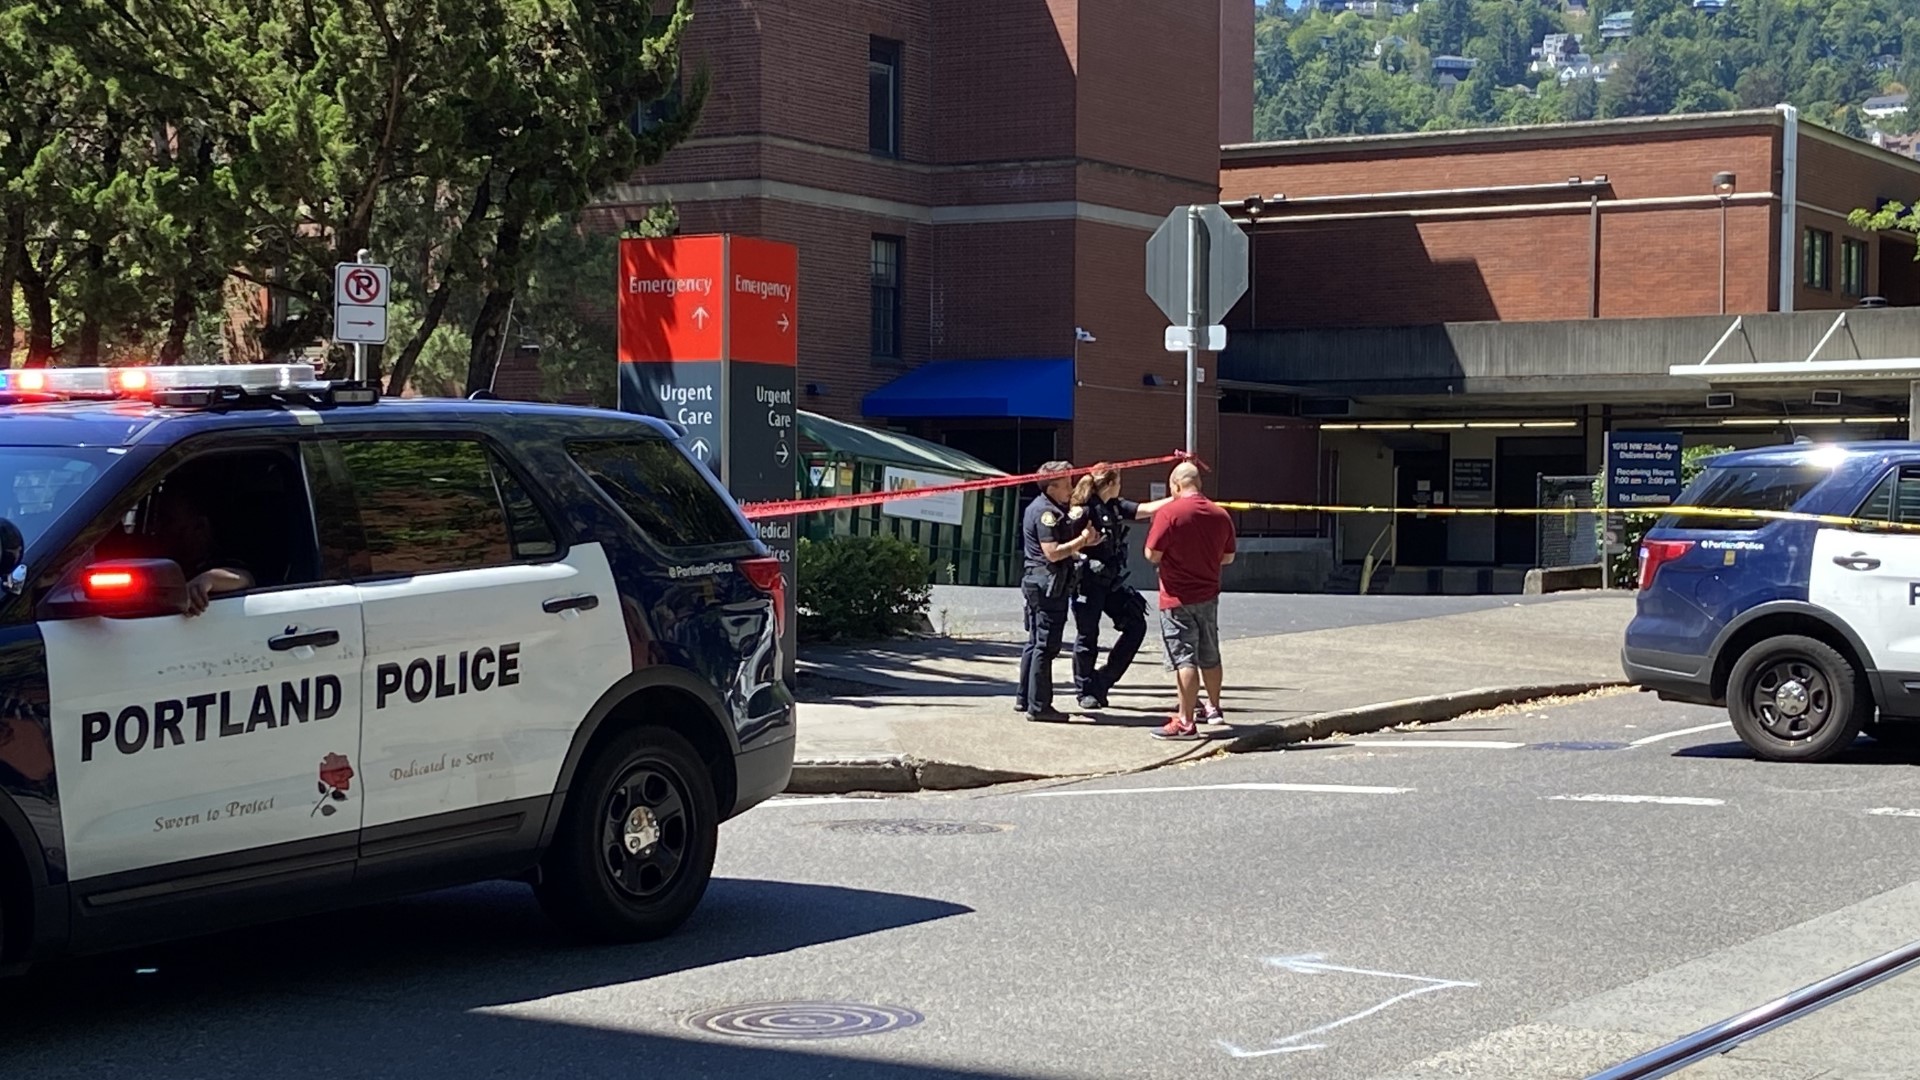 The suspect, PoniaX Kane Calles, 33, left the hospital after the shooting, prompting a search. Police tracked him to Gresham where officers shot and killed him.